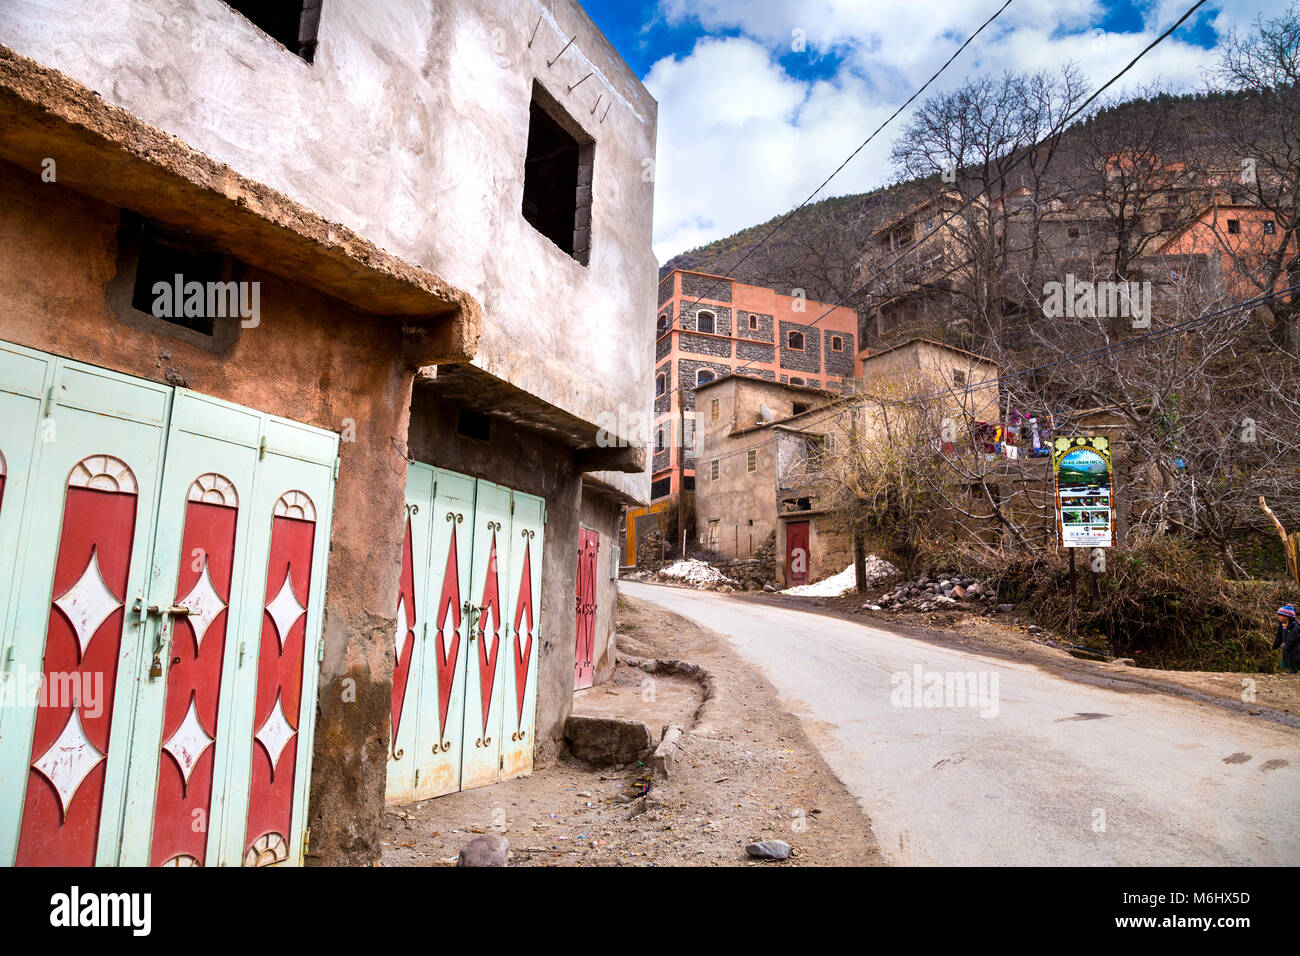 The small village of Imlil in the Atlas Mountains in Morocco Stock Photo